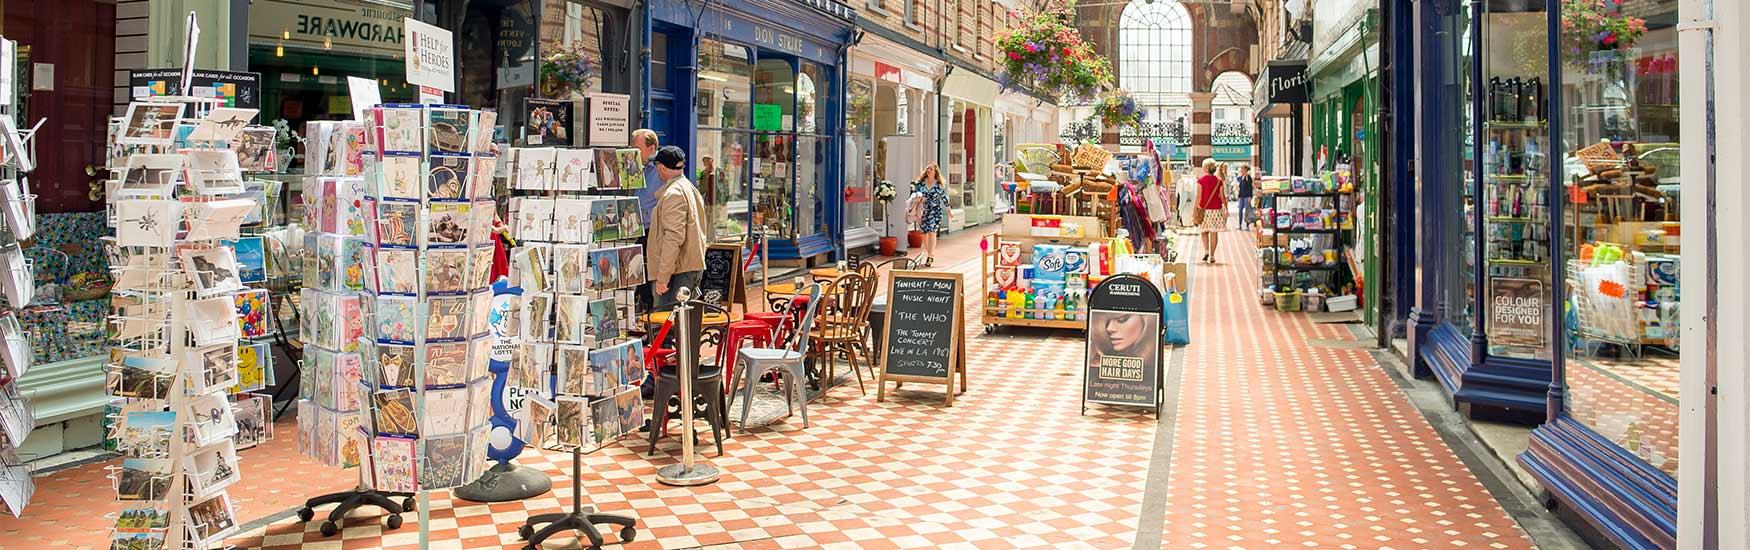 Westbourne shopping arcade showcasing goods and shops for keen Bournemouth shoppers